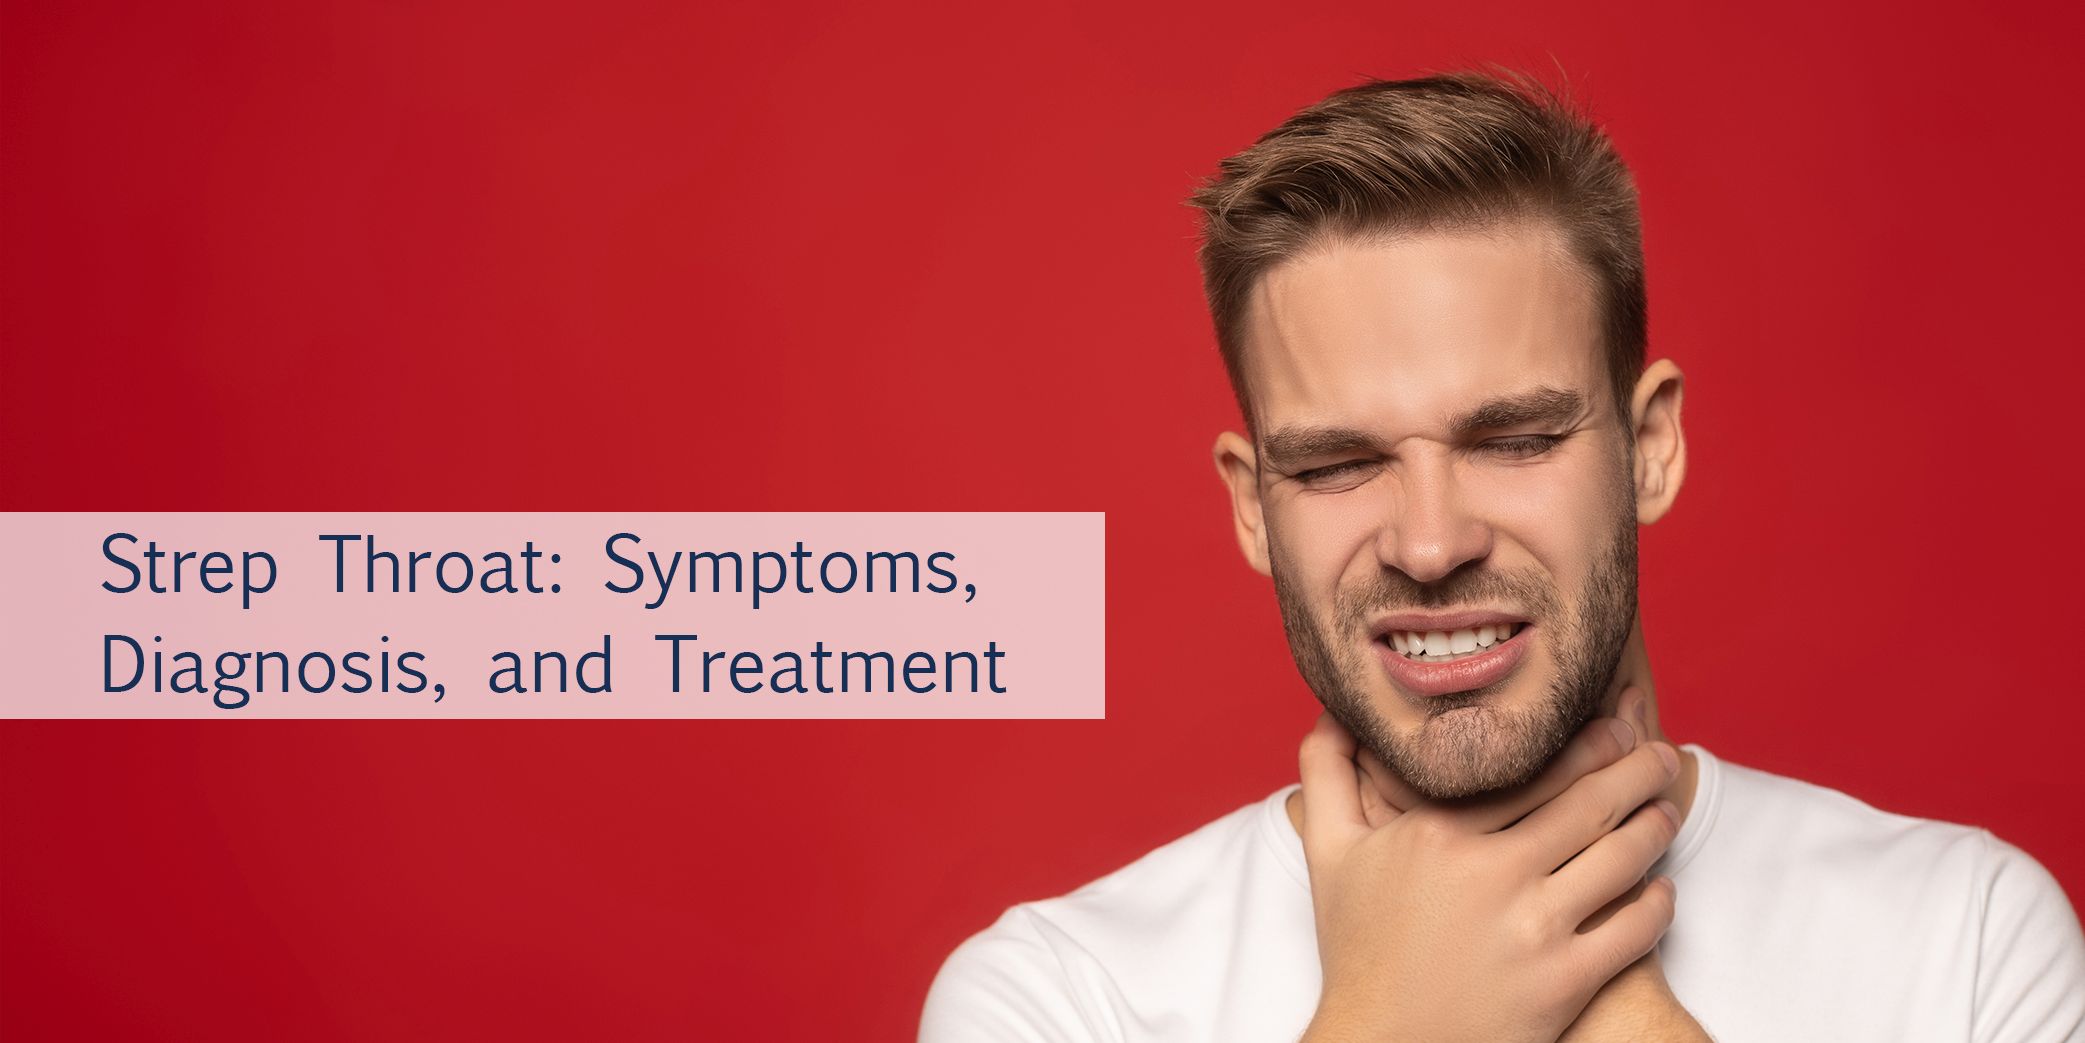 Strep Throat: Symptoms, Diagnosis, and Treatment